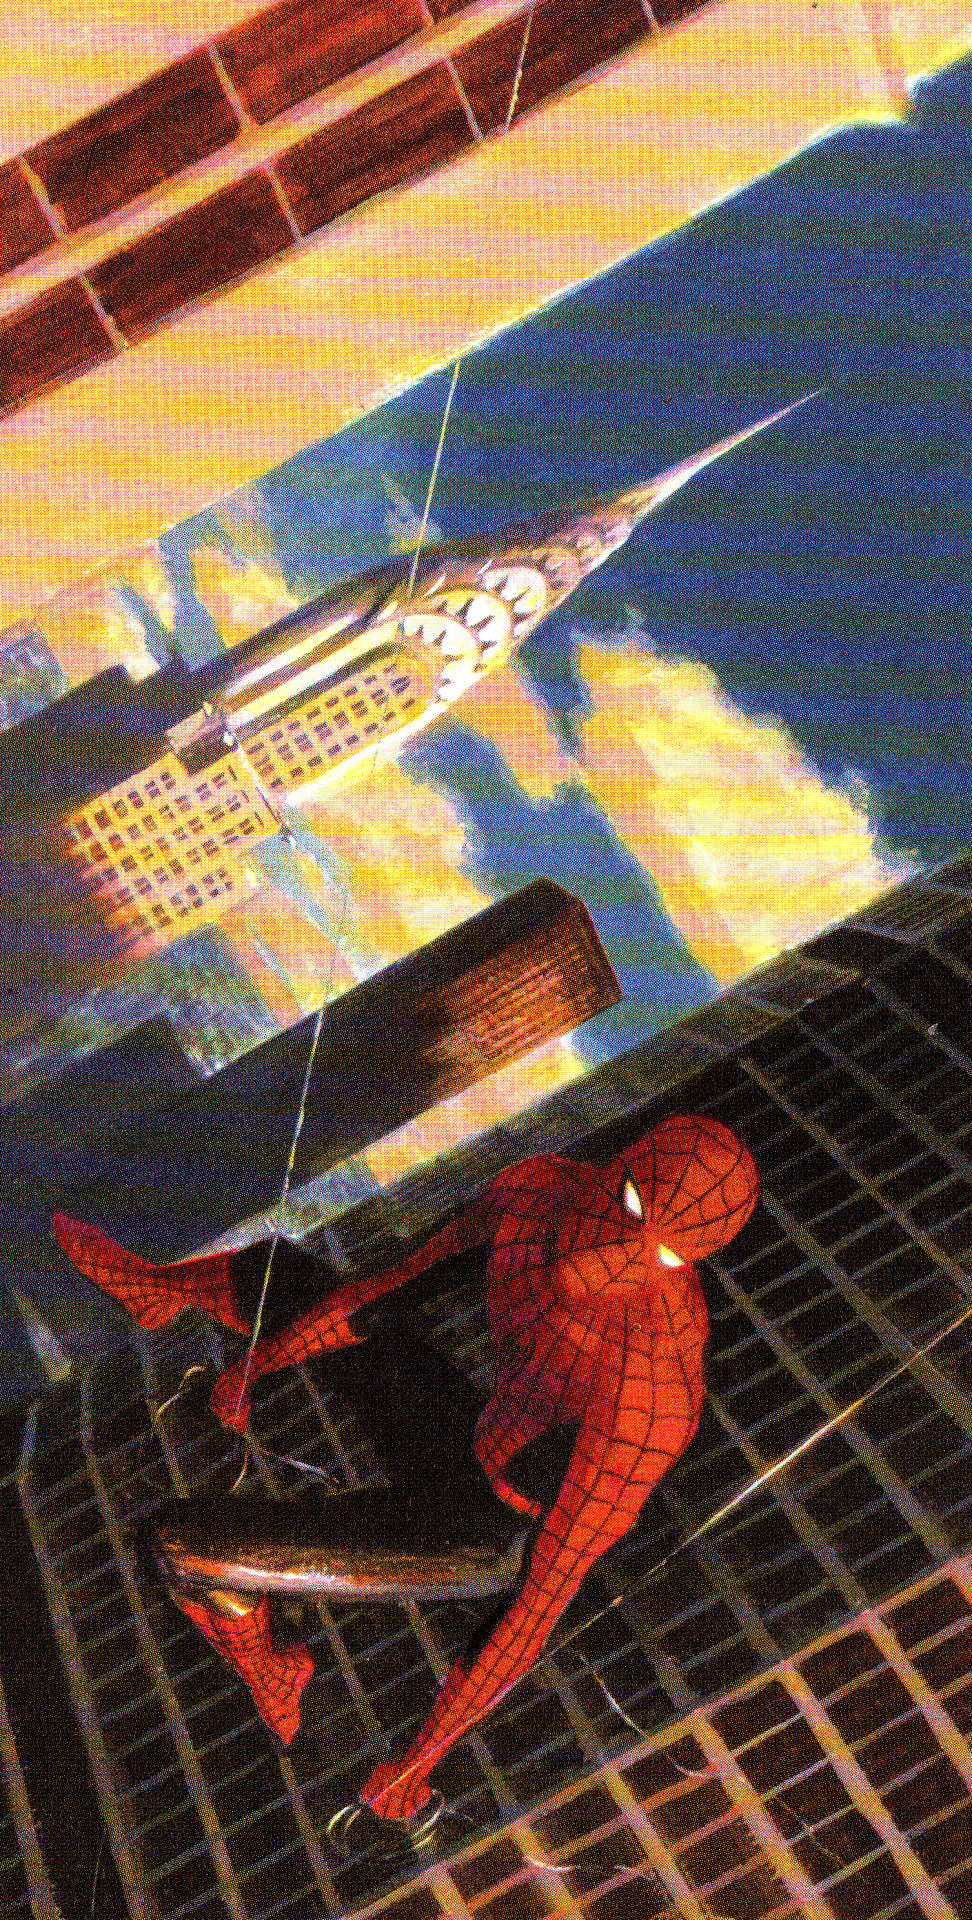 thecomicsvault:
“MYTHOS: SPIDER-MAN #1 (Aug. 2007)
Art by Paolo Rivera
”